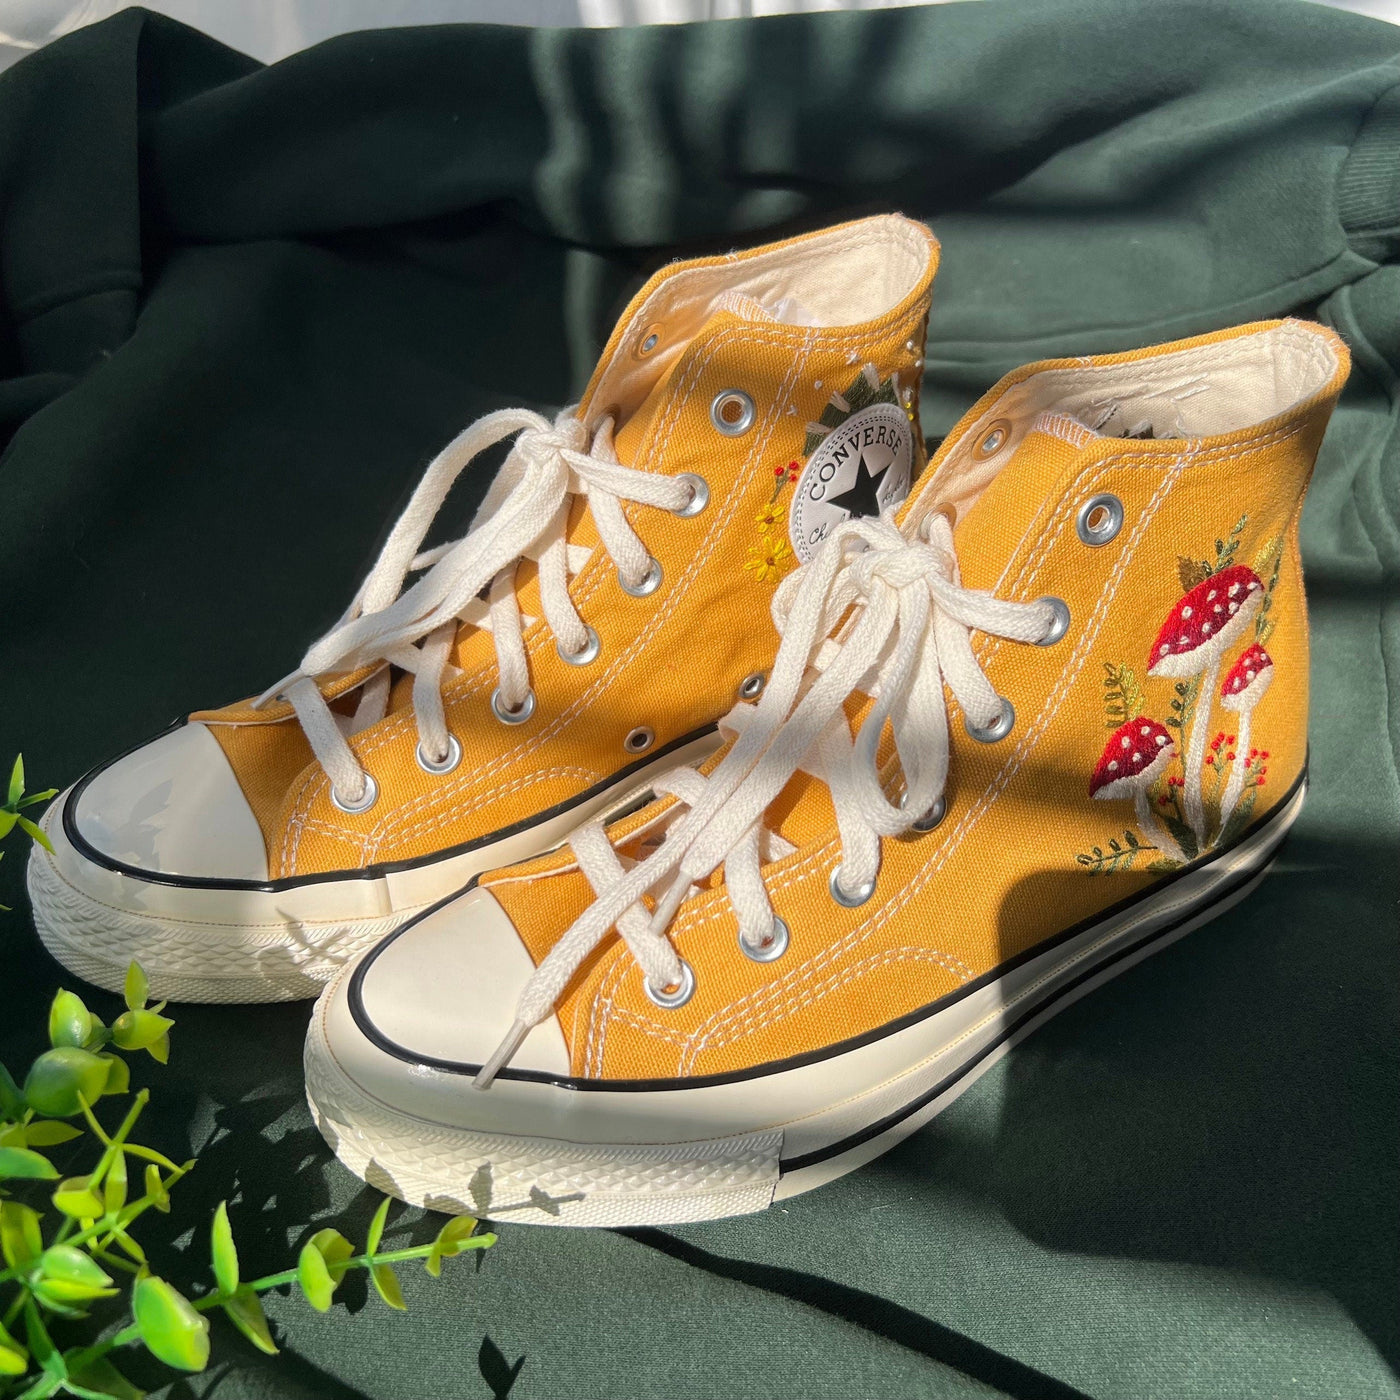 Converse High Tops, Embroidered Red Mushrooms And Butterfly